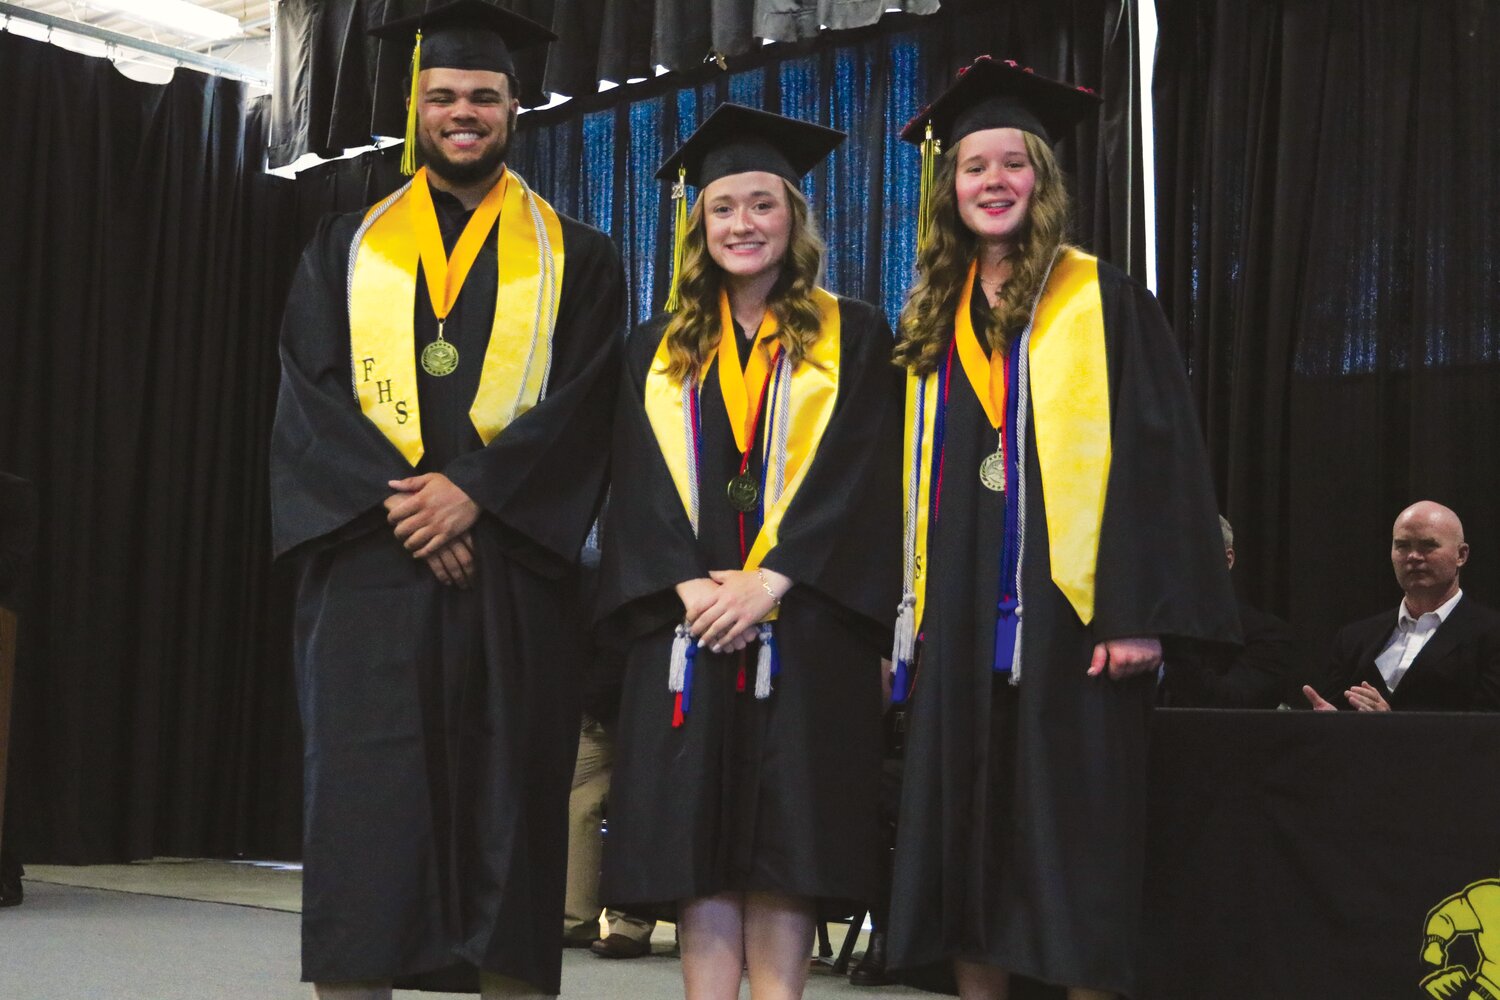 Three seniors graduated Magna Cum Laude at the top of their class. Left to right: Haden Kelly, Megan Lewis, and Addison Newell.